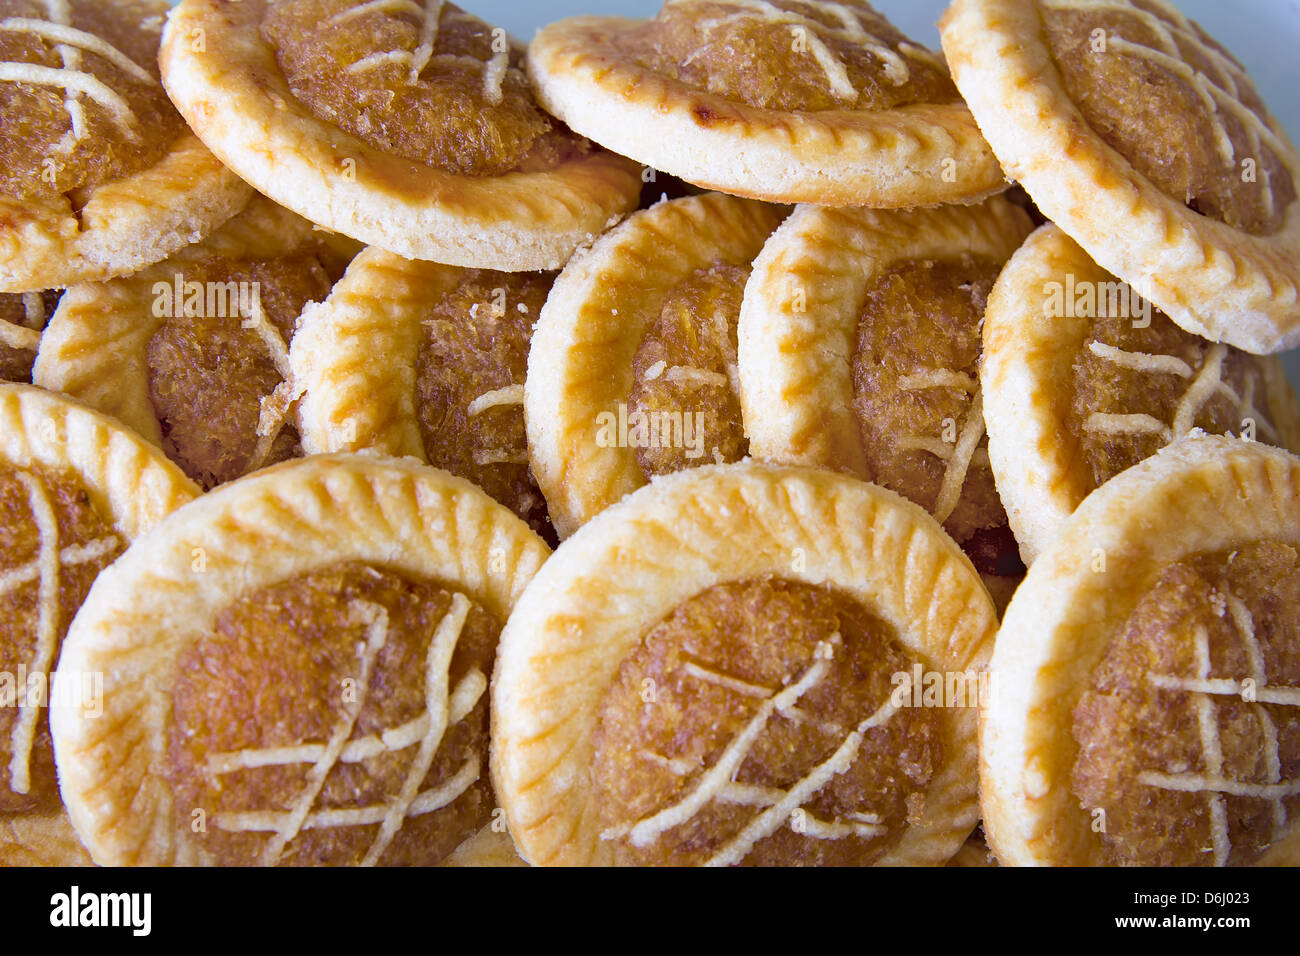 Pineapple Tart Pastry Stacked Up Closeup Stock Photo